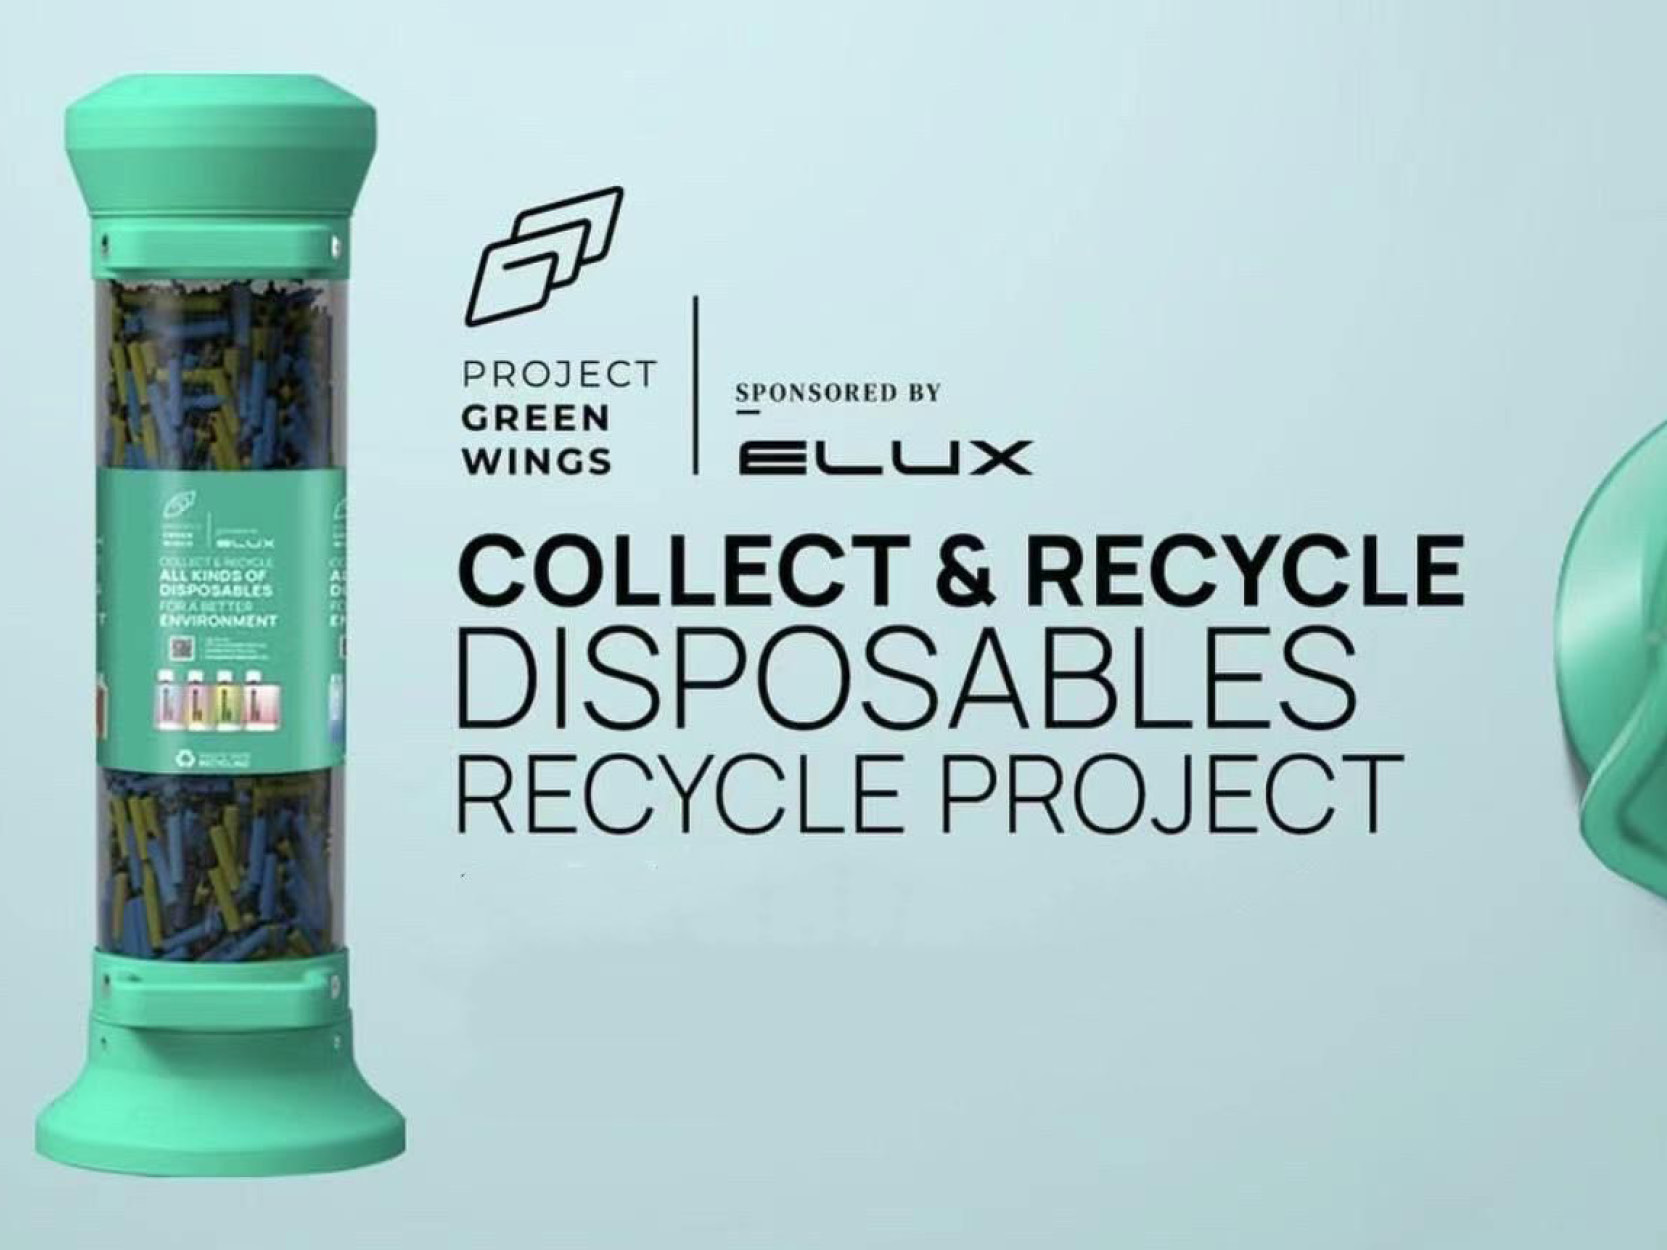 GREEN WINGS PROJECT LAUNCHES GROUNDBREAKING E-CIGARETTE RECYCLING PROGRAM